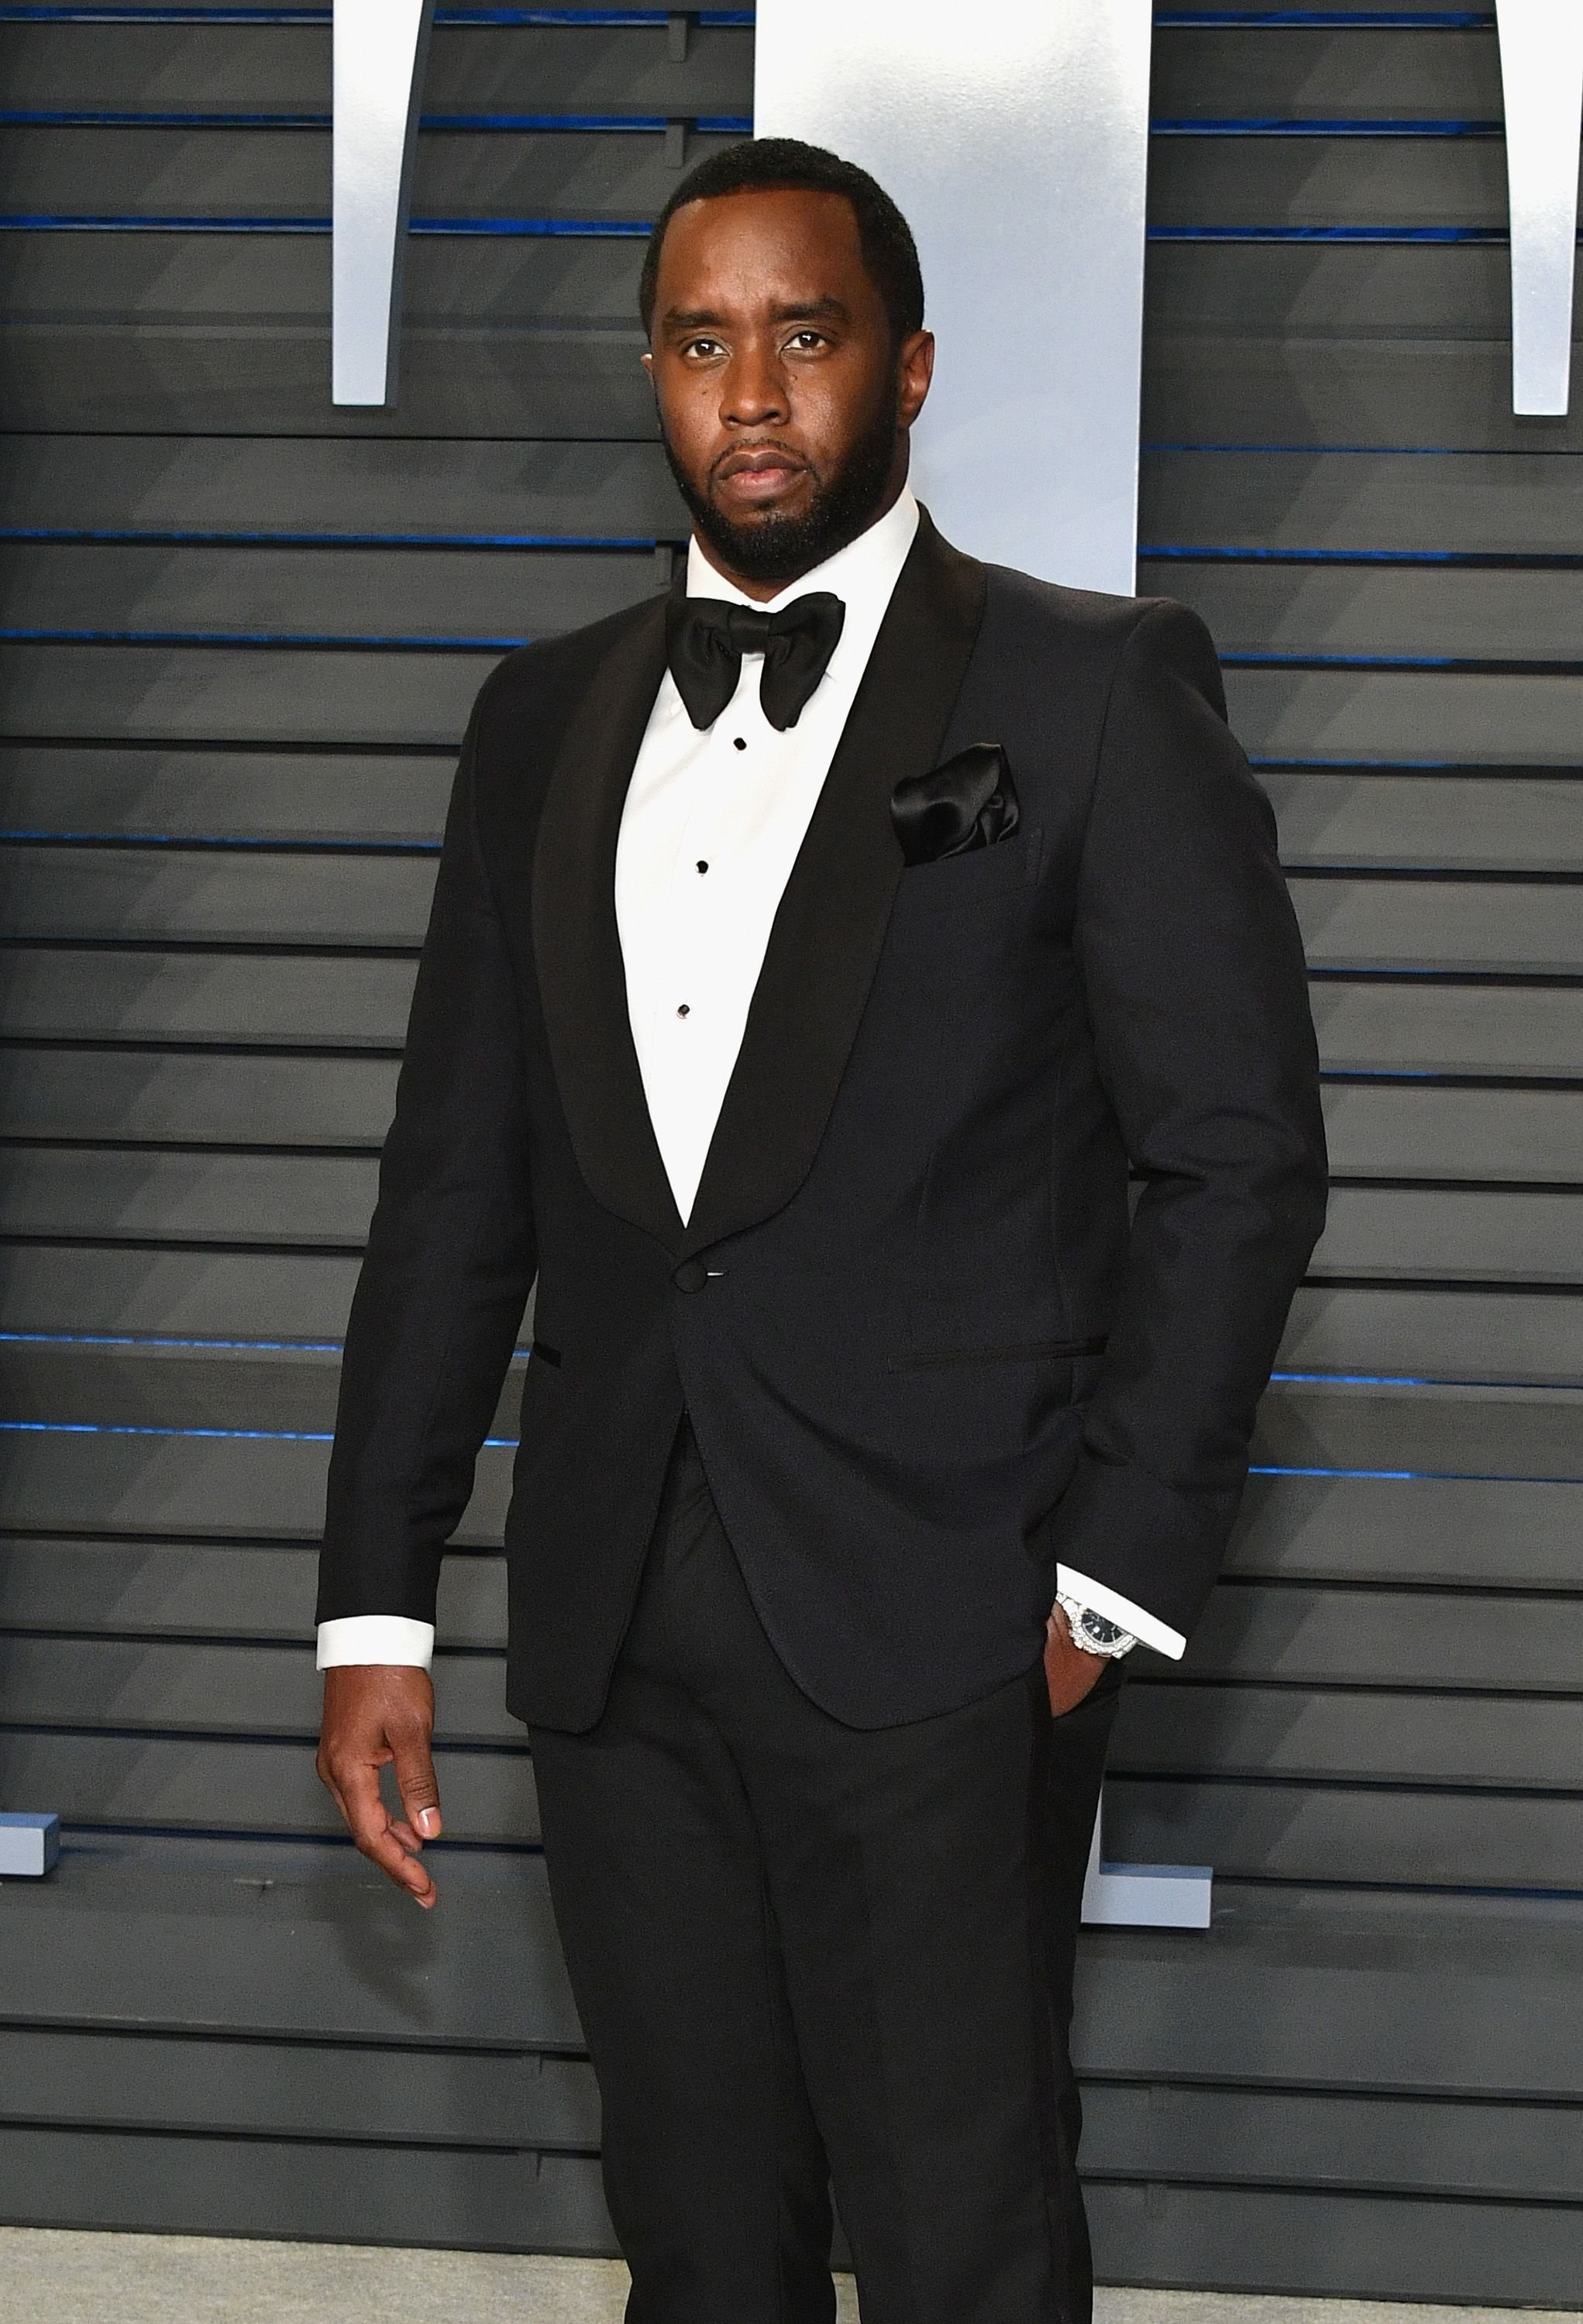 Rapper Diddy attends the Vanity Fair Oscar Party at Wallis Annenberg Center for the Performing Arts in March 2018. | Photo: Getty Images